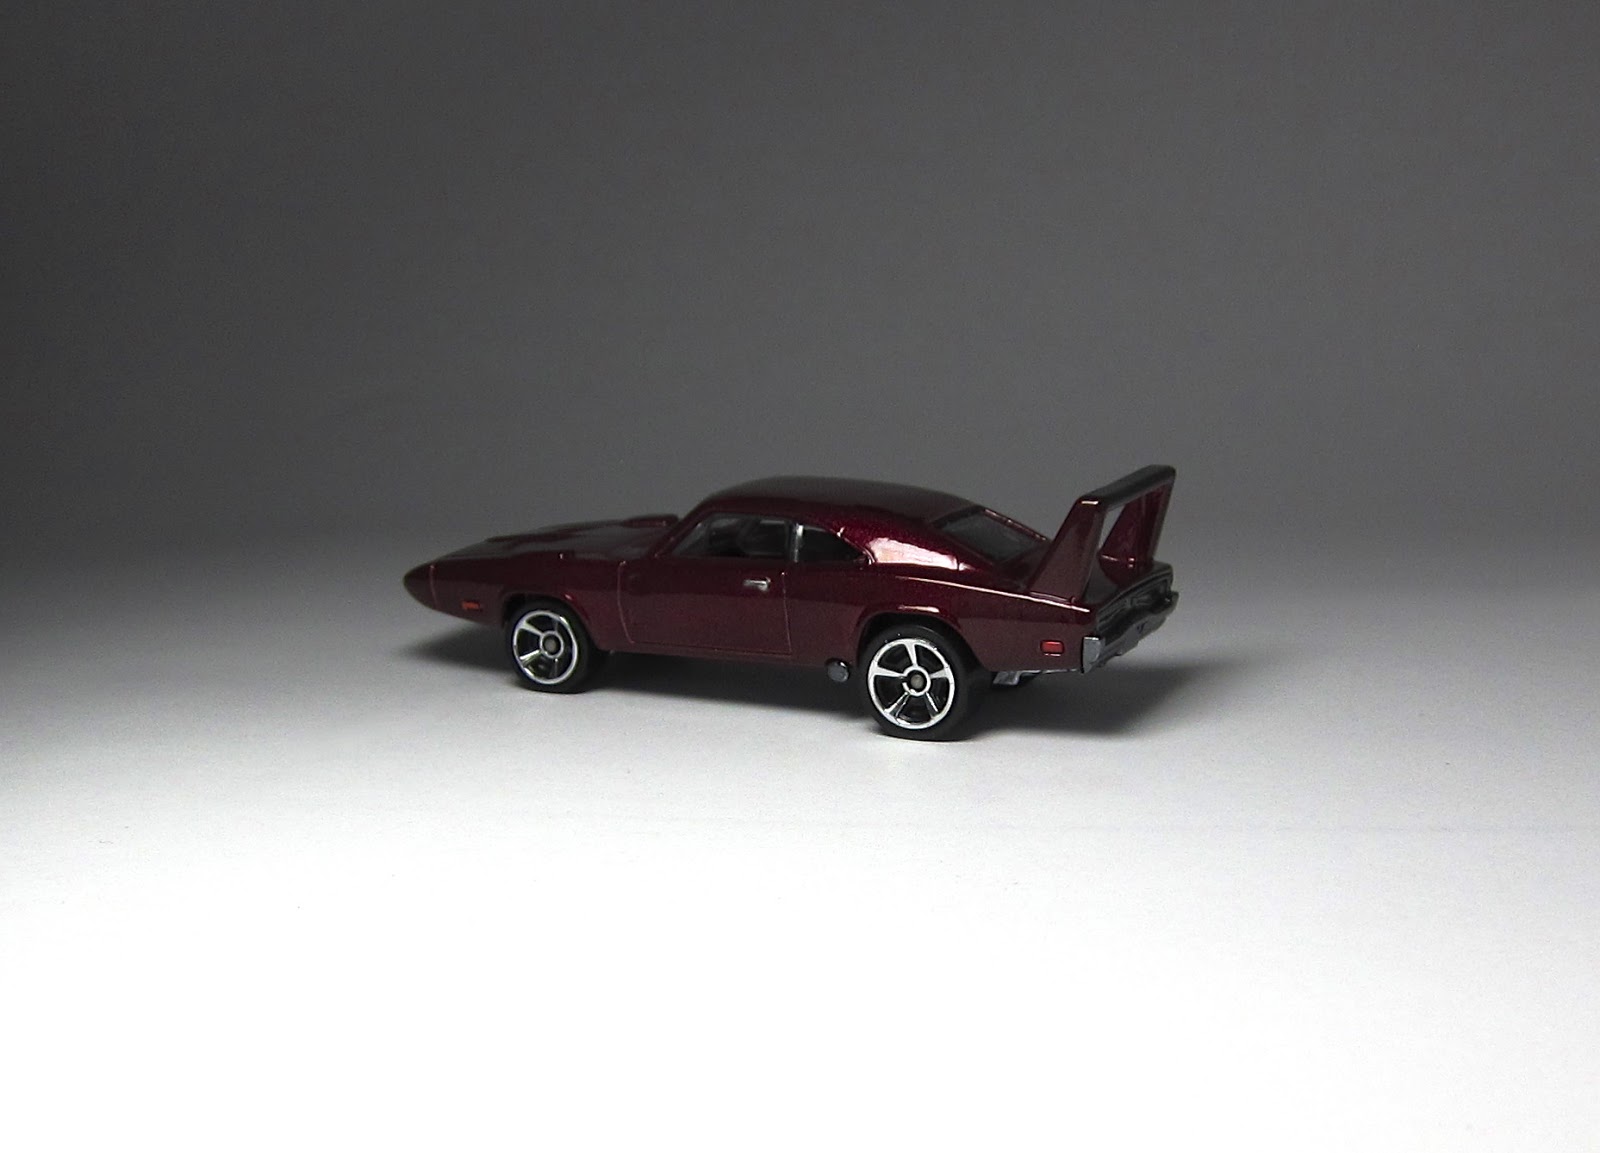 1968, Dodge, Charger, Daytona, Fast, Furious, 6, Muscle, Classic, Hot, Rod, Rods, Movie, Movies, Toy, Toys, Hotwheels, Jpg Wallpaper